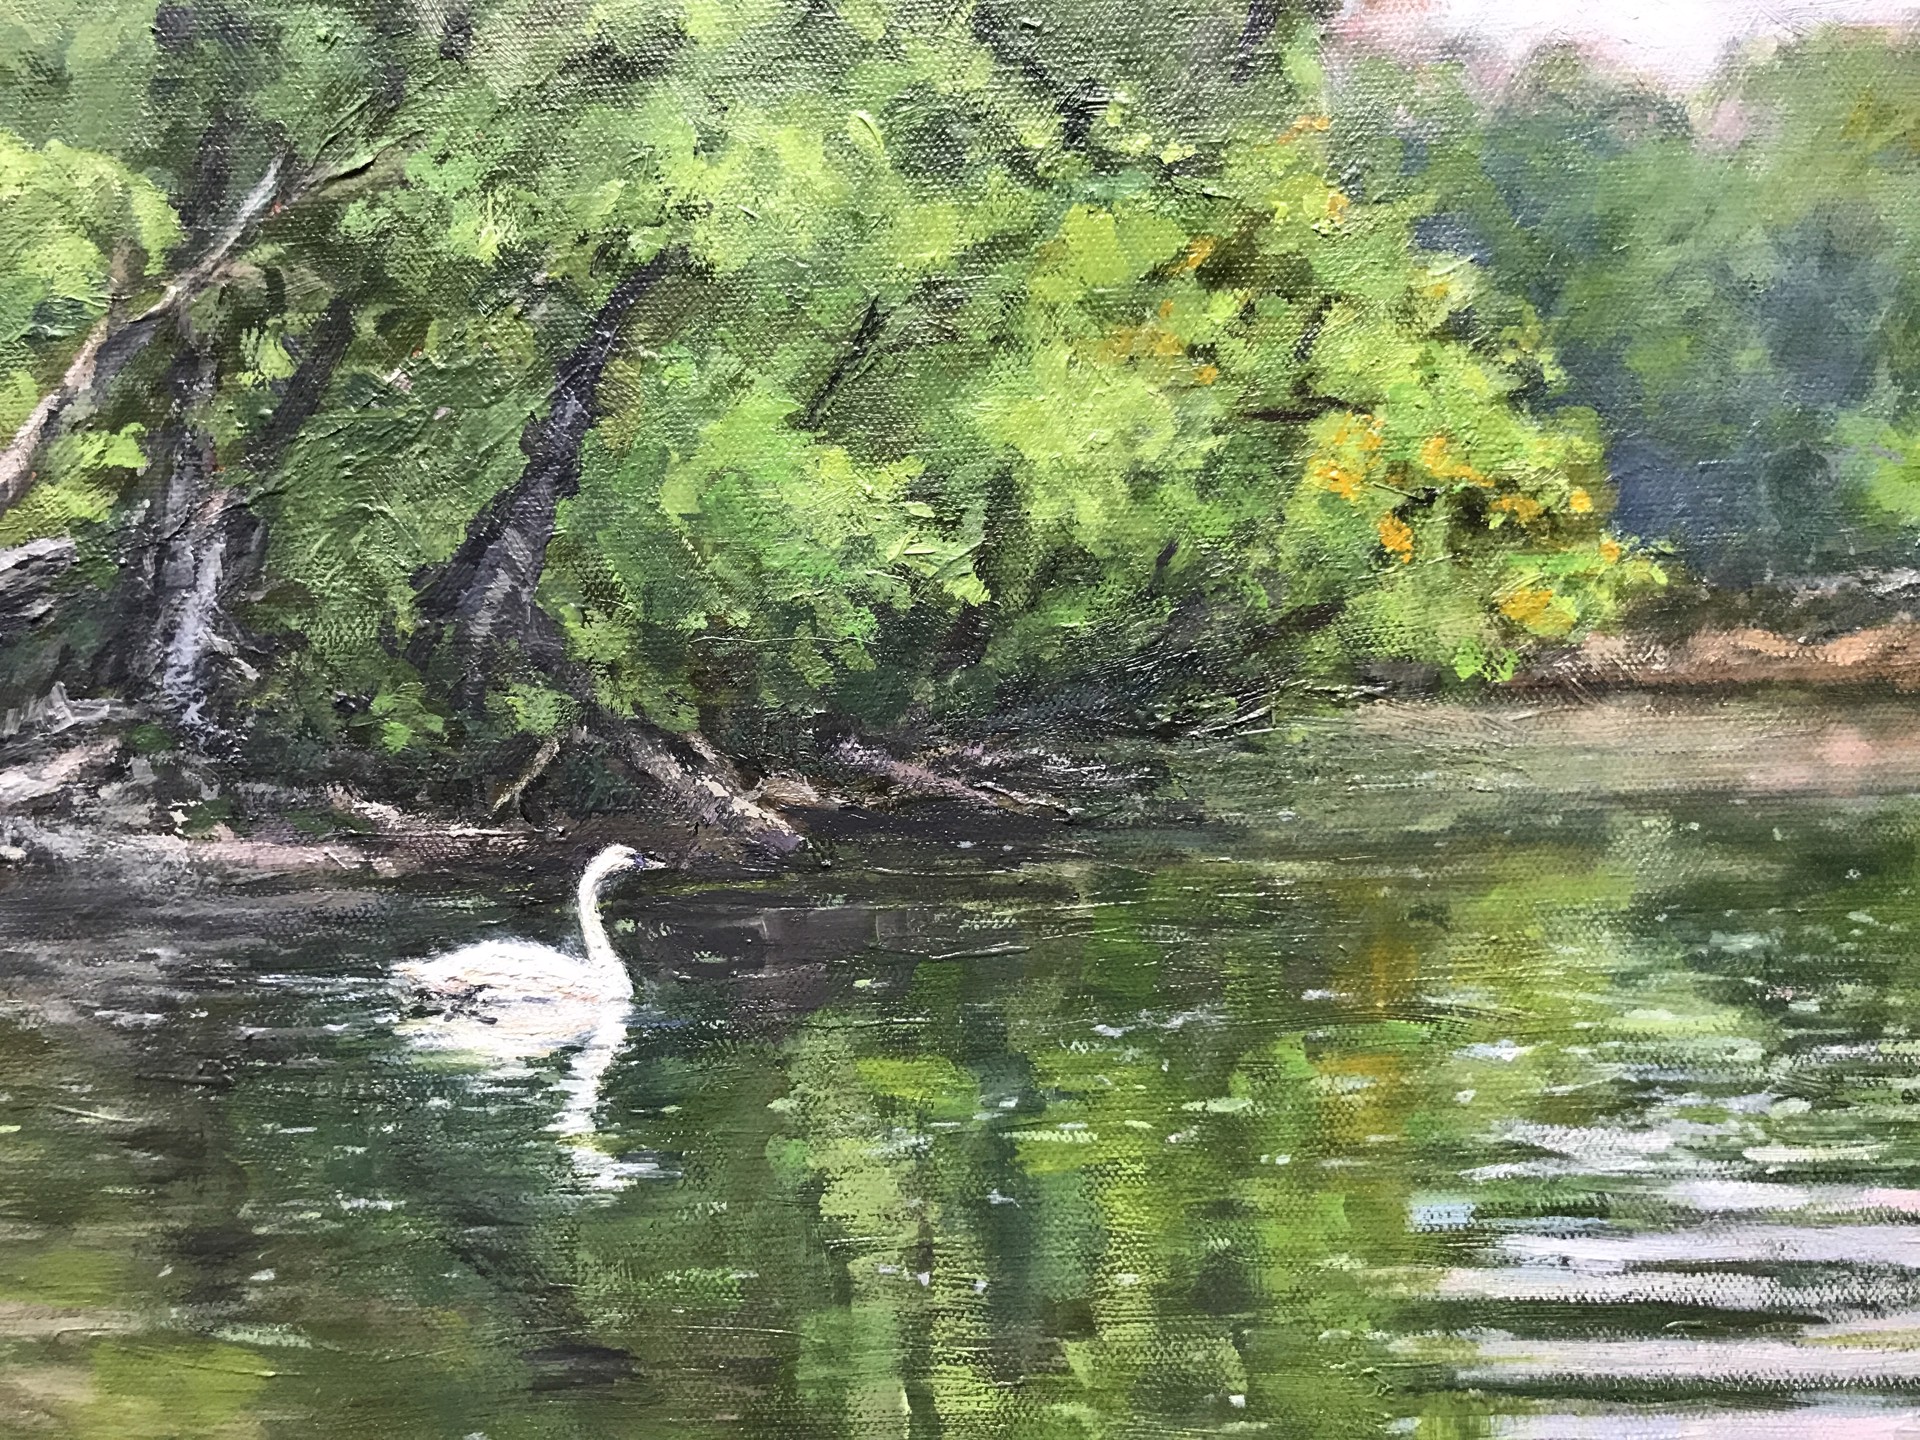 River Bend With Swan by Joseph Theroux